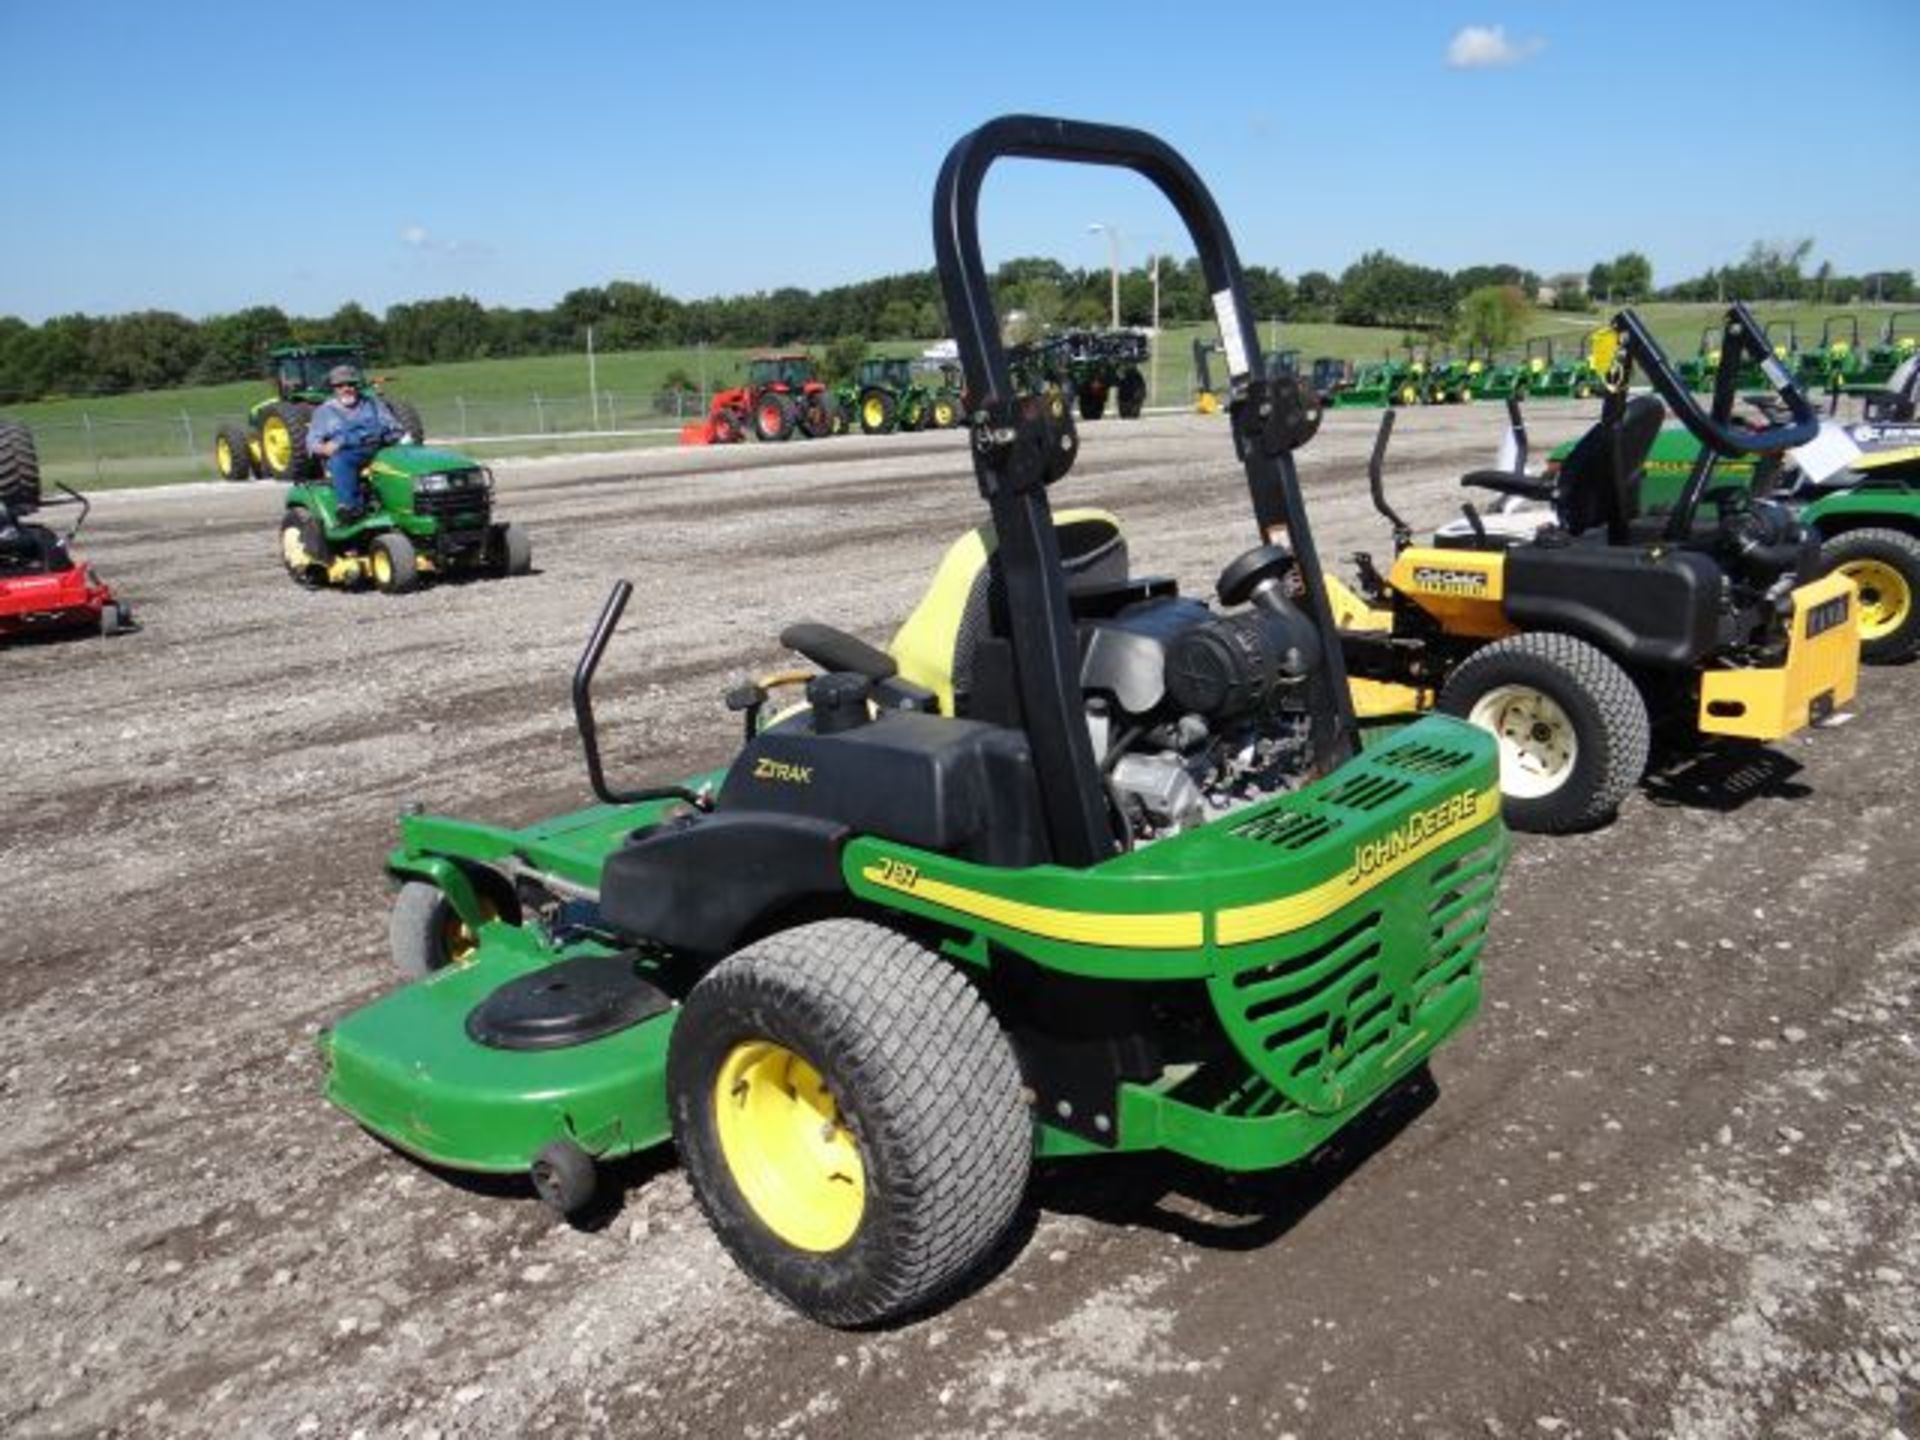 Lot 50261 - 2007 JD 797/72 Mid Z Pro Mower 2013 hrs, 29hp, Kawasaki, Water Cool, Fuel Injection, 72" - Image 3 of 4